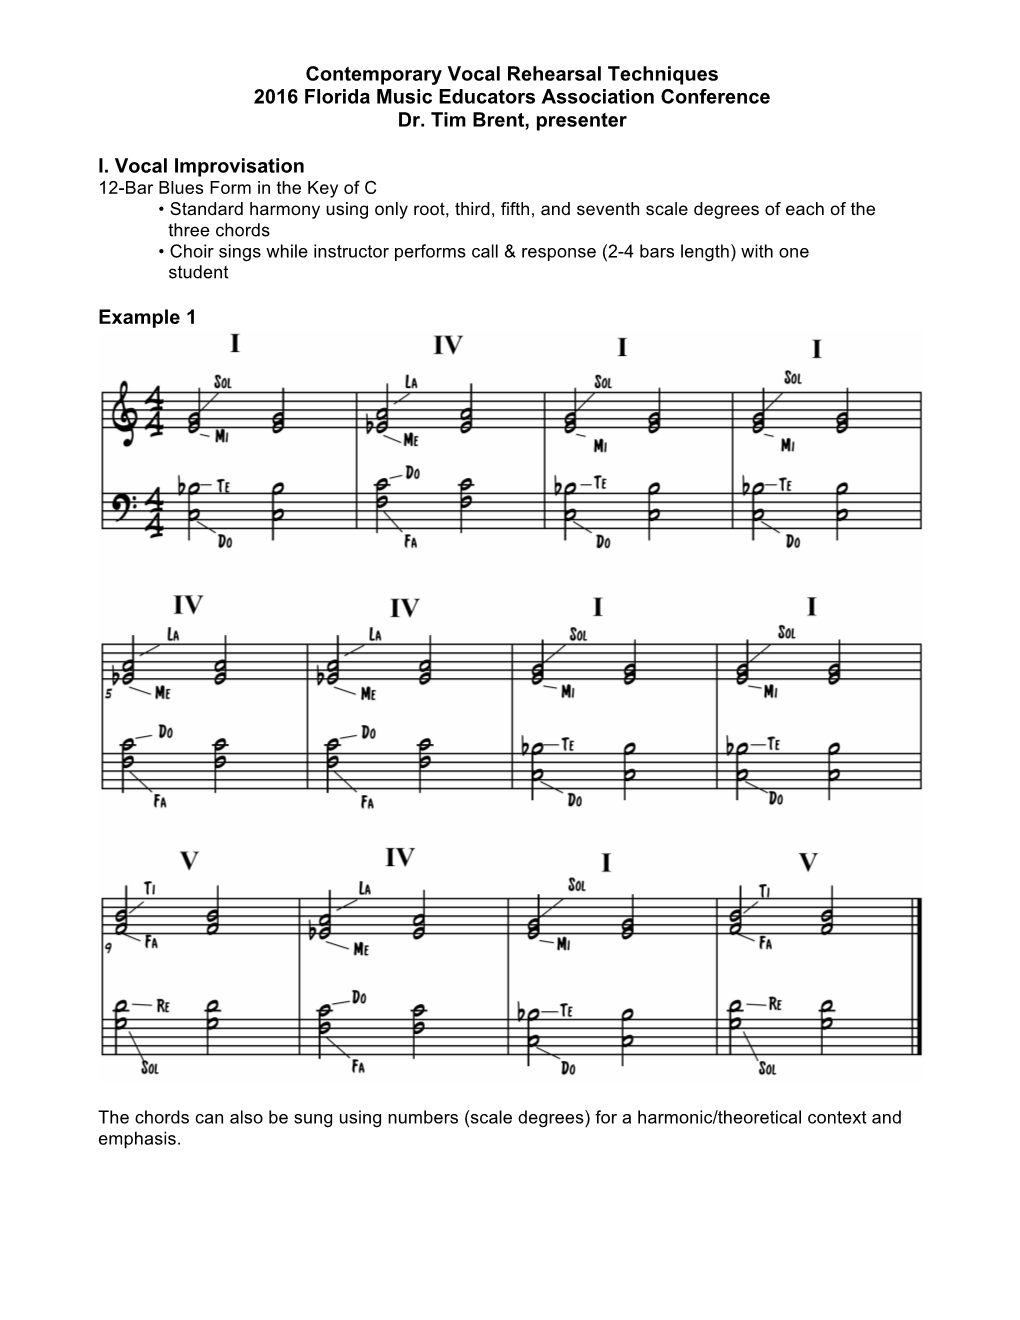 Contemporary Vocal Rehearsal Techniques Interest Session Handout